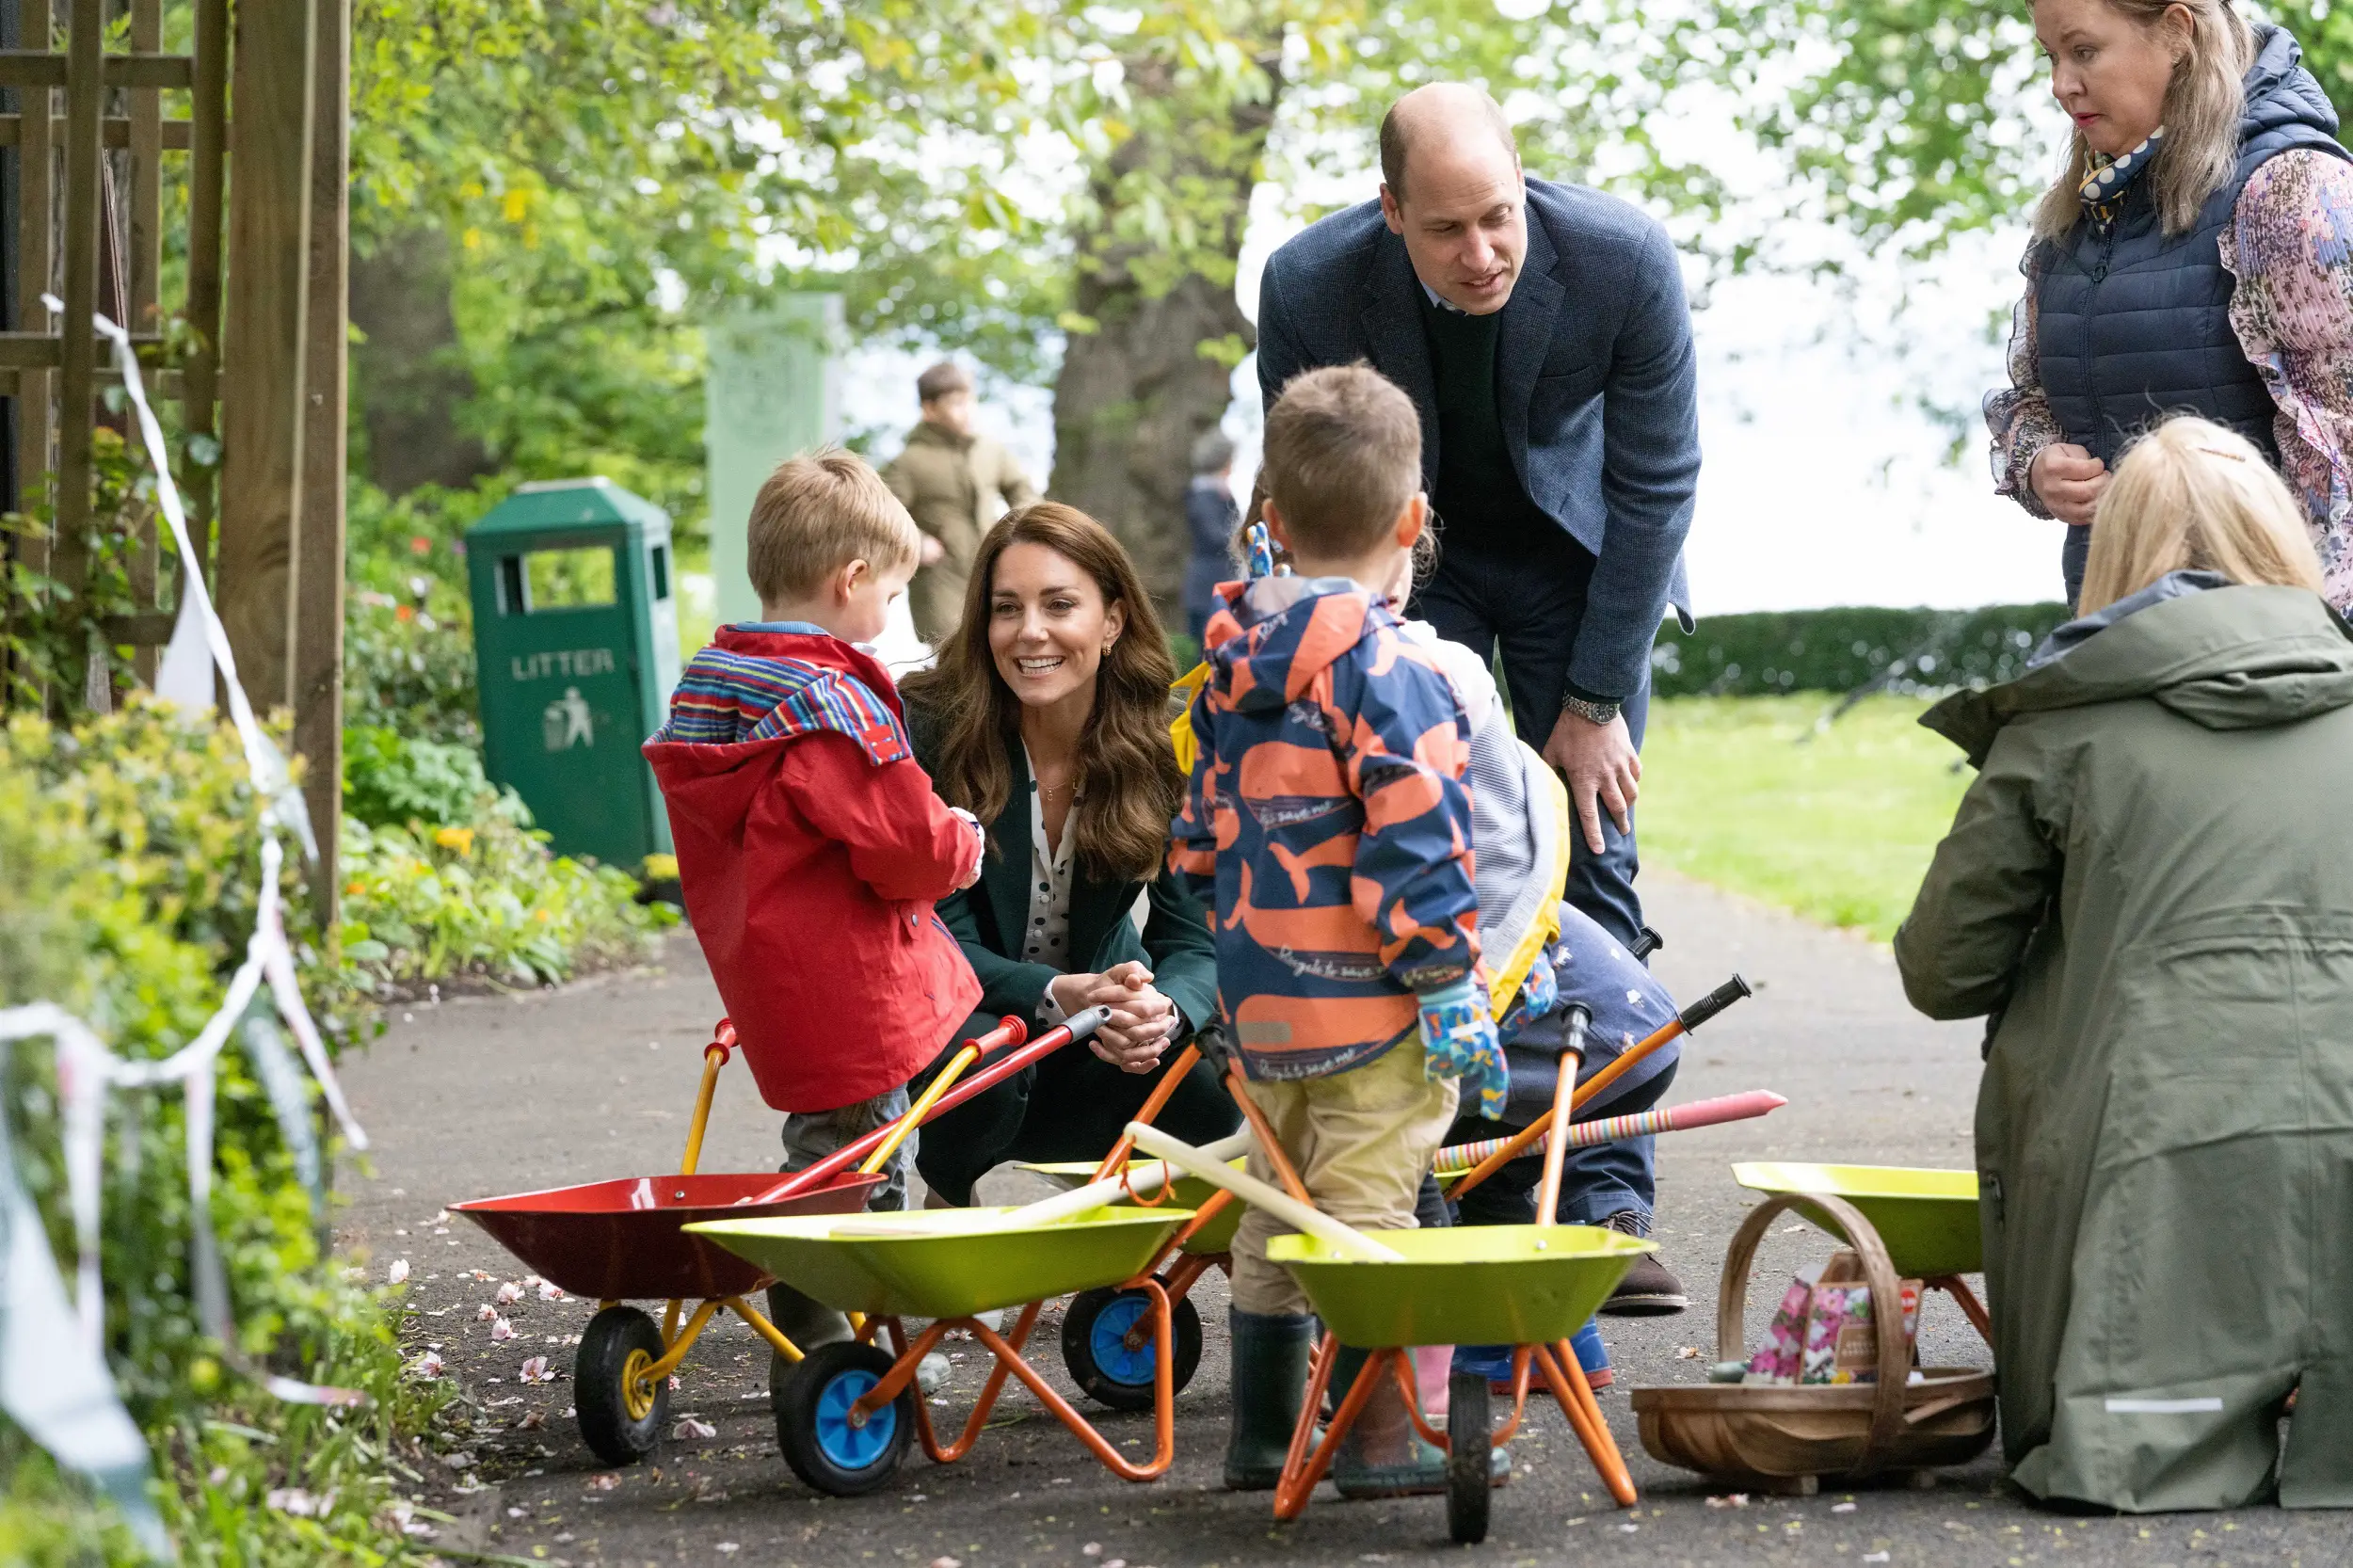 Prince William and Duchess Kate helped nursery children plant seeds good for butterflies on a nature trail in the park.